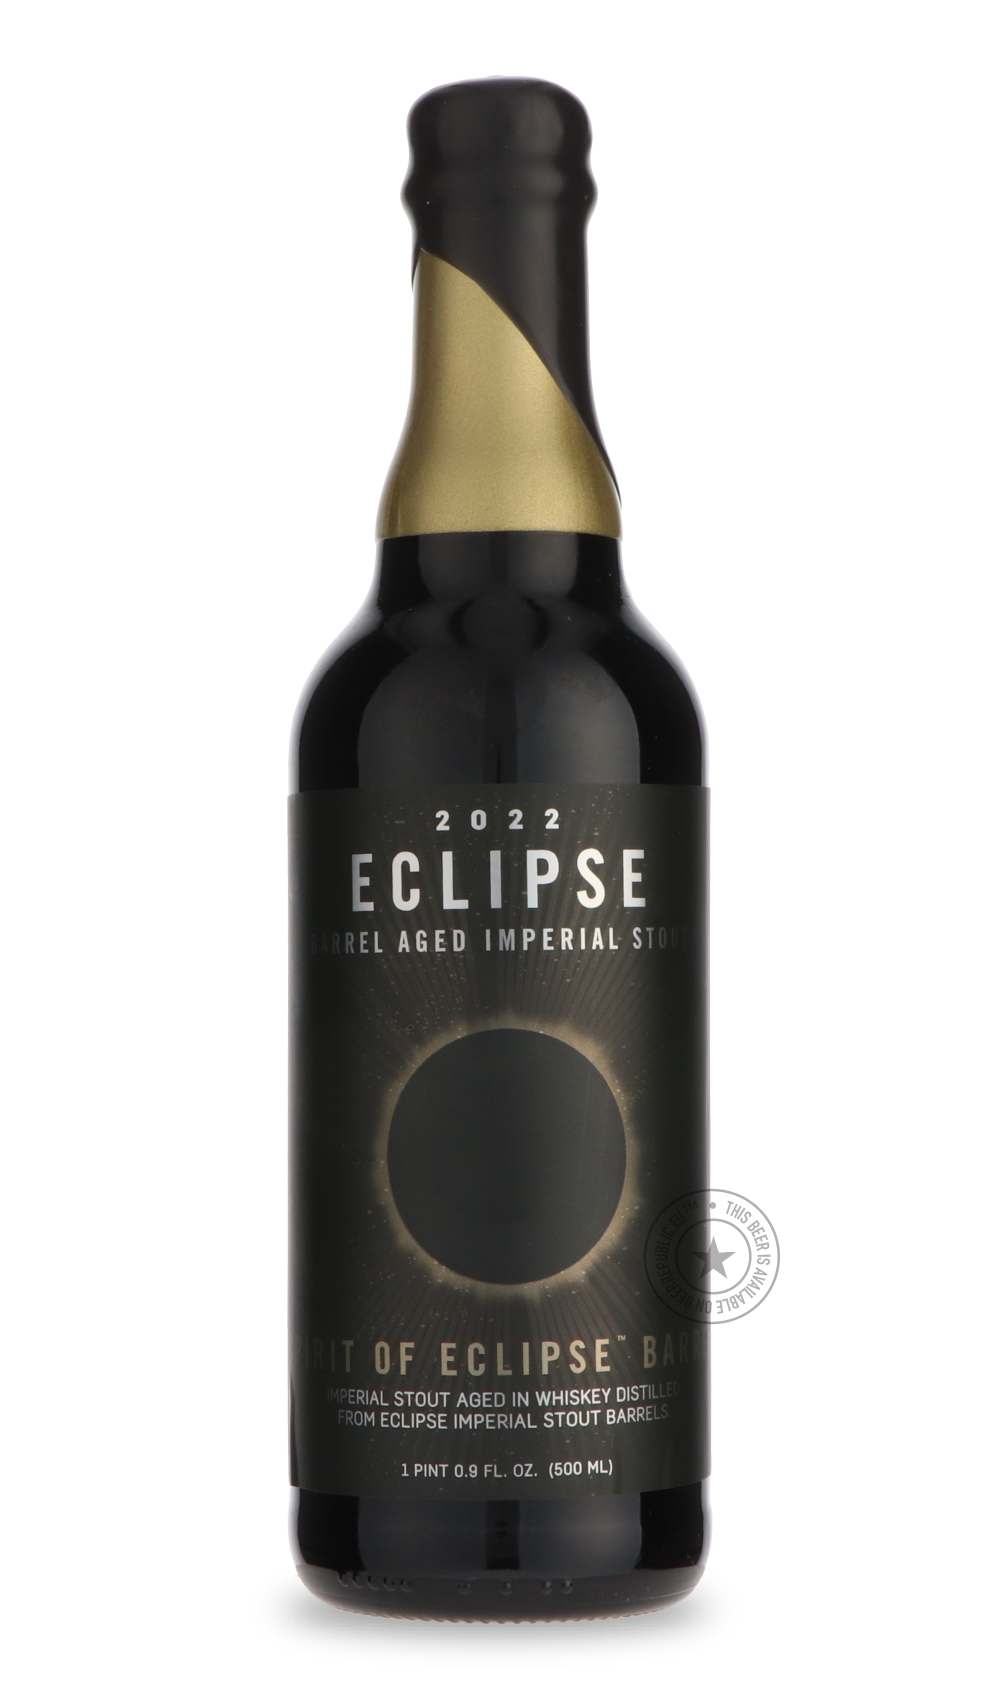 -FiftyFifty- Eclipse - Spirit of Eclipse-Stout & Porter- Only @ Beer Republic - The best online beer store for American & Canadian craft beer - Buy beer online from the USA and Canada - Bier online kopen - Amerikaans bier kopen - Craft beer store - Craft beer kopen - Amerikanisch bier kaufen - Bier online kaufen - Acheter biere online - IPA - Stout - Porter - New England IPA - Hazy IPA - Imperial Stout - Barrel Aged - Barrel Aged Imperial Stout - Brown - Dark beer - Blond - Blonde - Pilsner - Lager - Wheat 